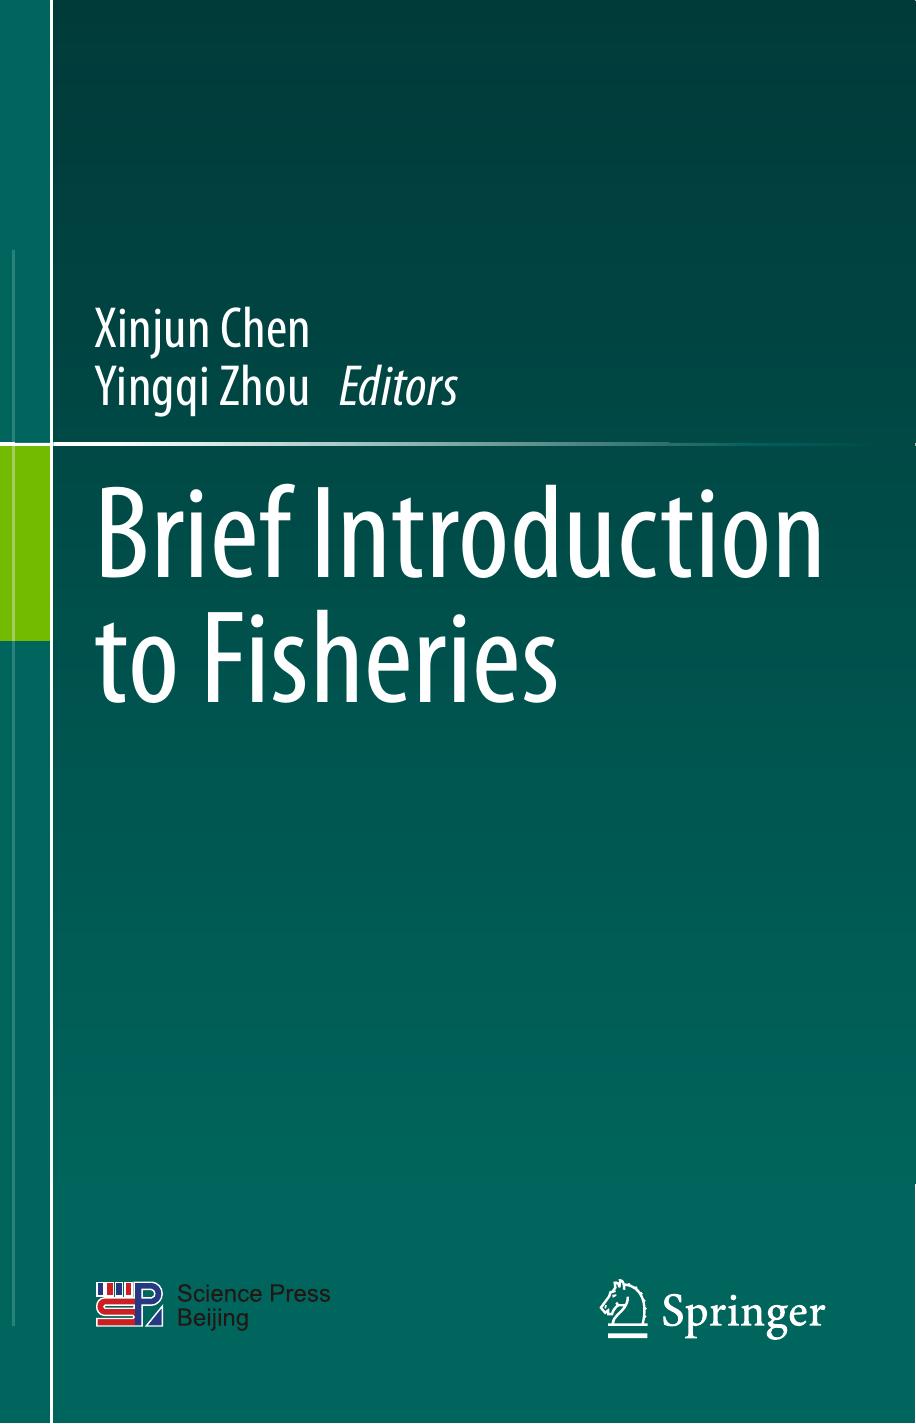 Brief Introduction to Fisheries-Springer Singapore Springer (2020)